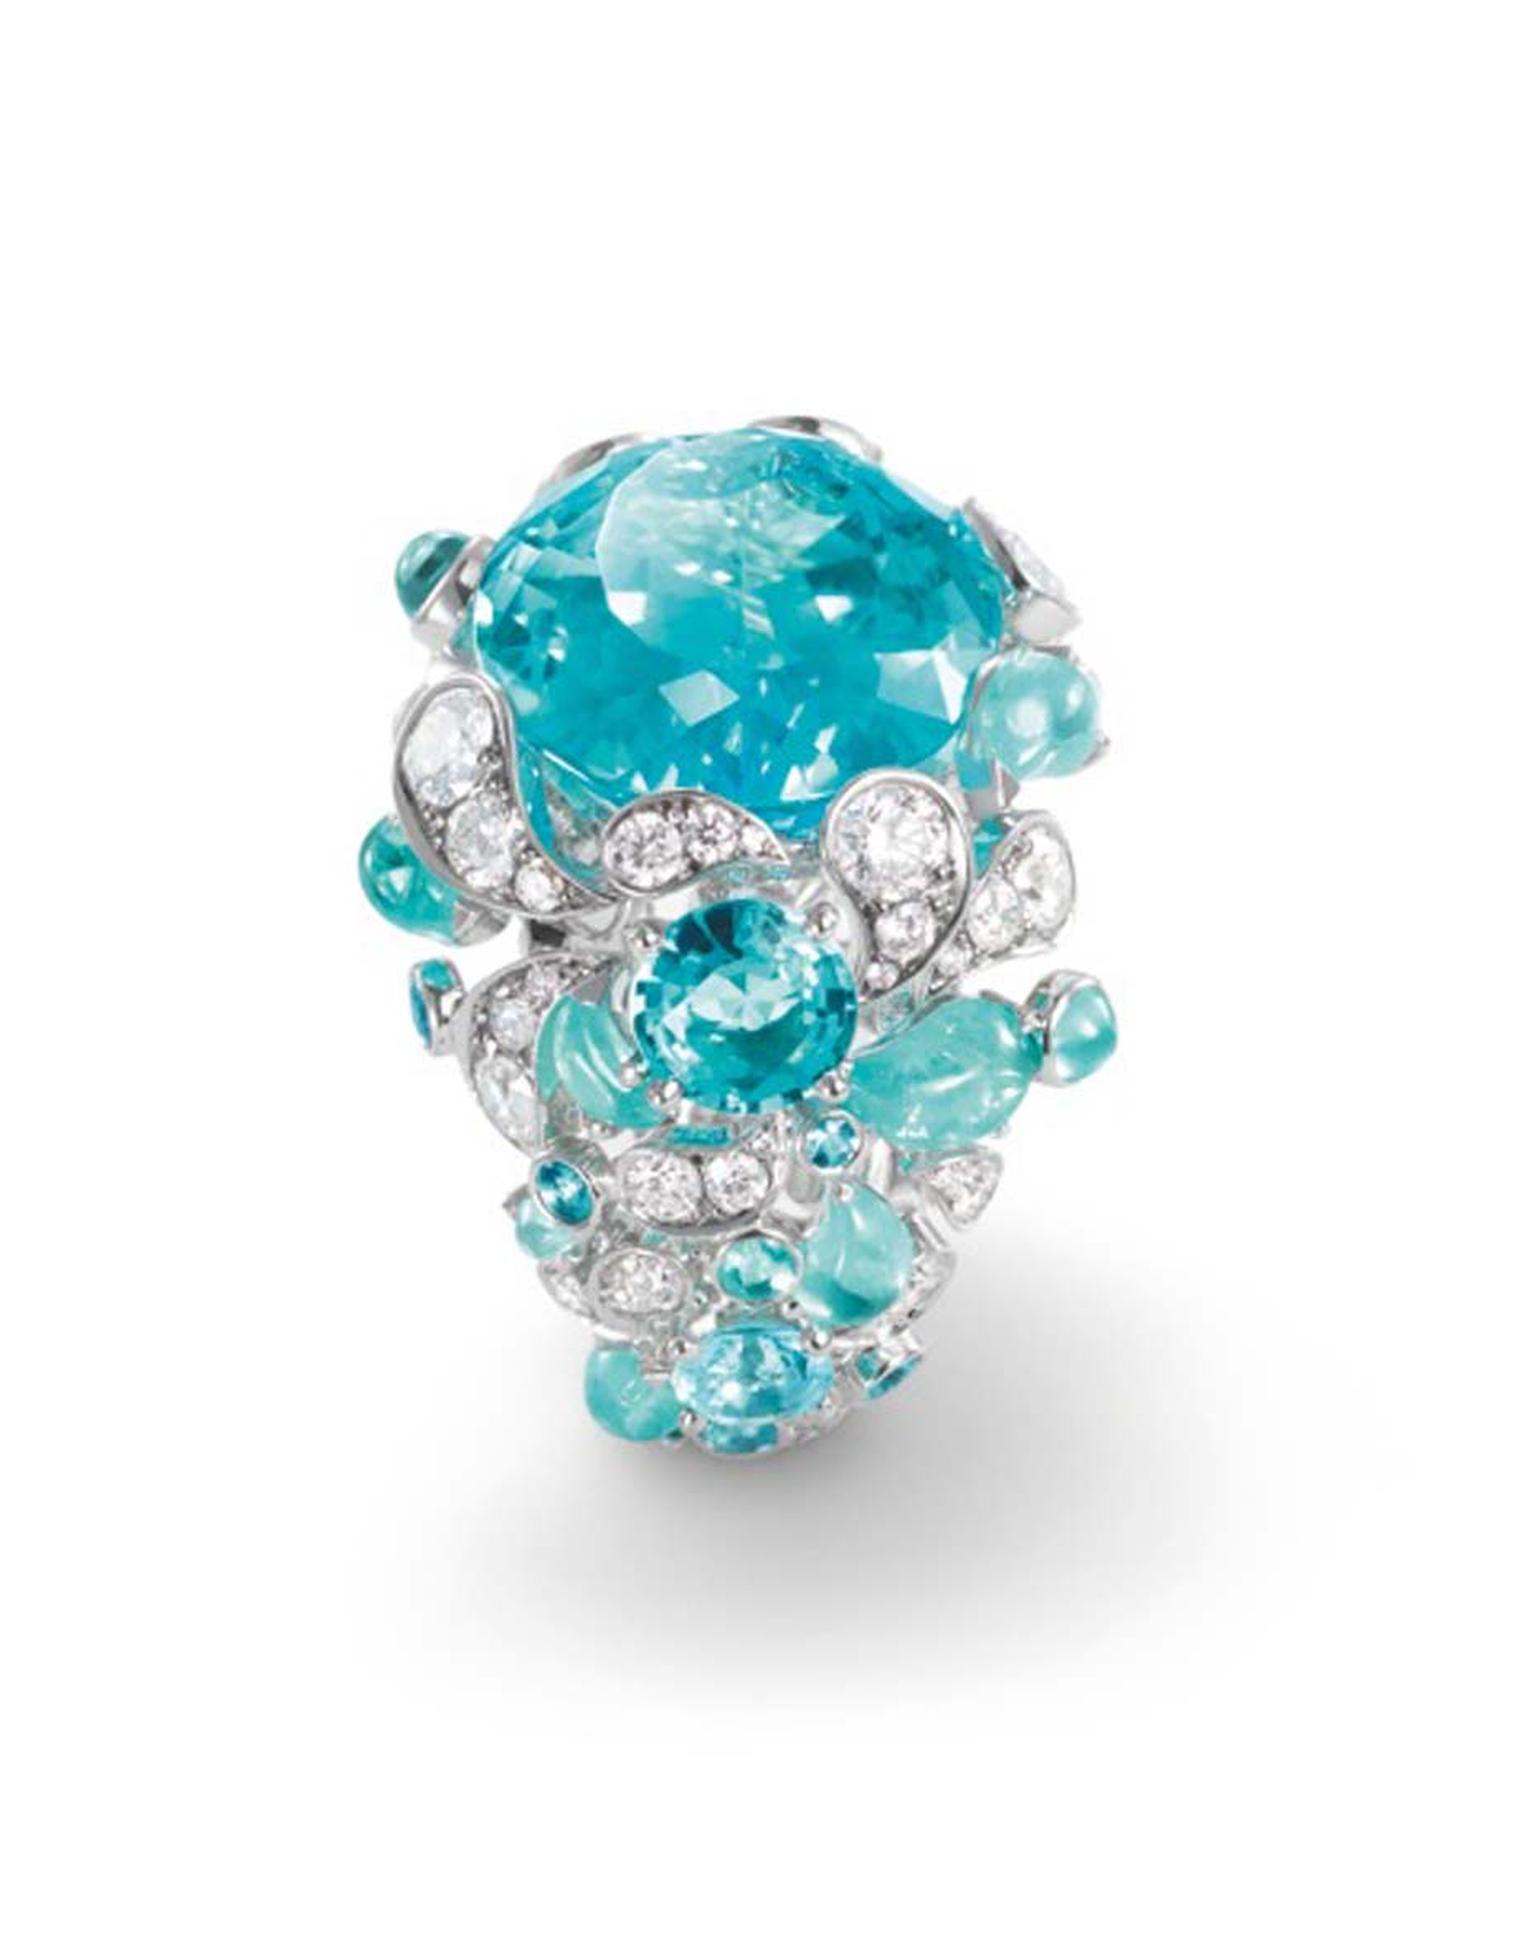 Chaumet also turned to Africa for its latest Lumières d'Eau high jewellery collection, which sets droplets of electric-blue Paraiba-like tourmalines off against splashes of diamonds and a large, square-cut aquamarines.